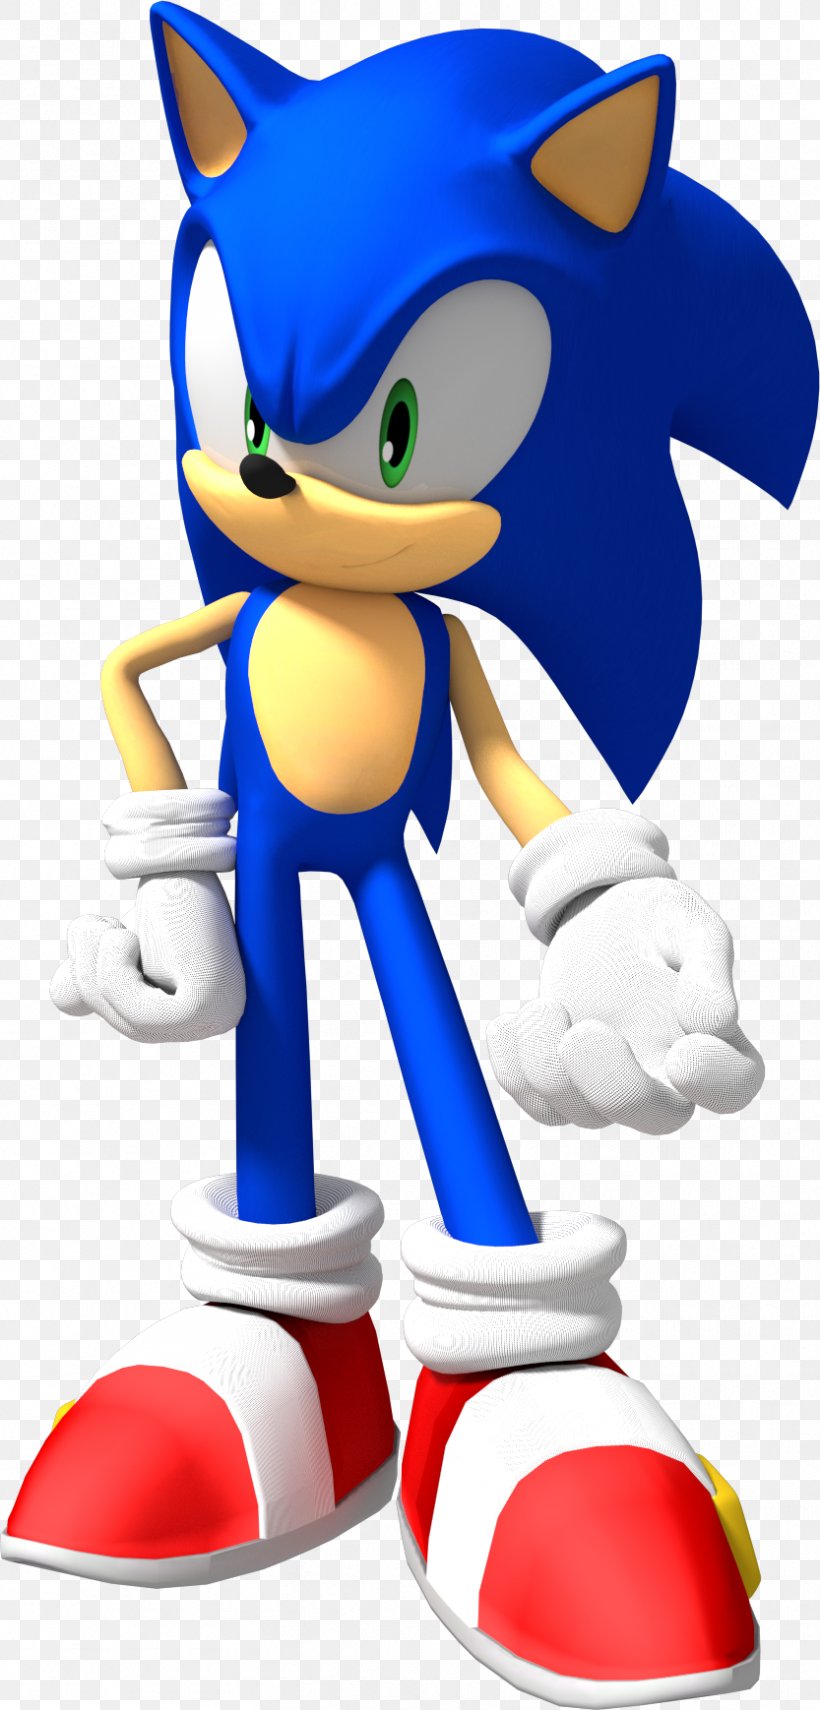 Sonic The Hedgehog Sonic 3D Shadow The Hedgehog Ariciul Sonic Charmy Bee, PNG, 833x1738px, Sonic The Hedgehog, Action Figure, Ariciul Sonic, Cartoon, Charmy Bee Download Free